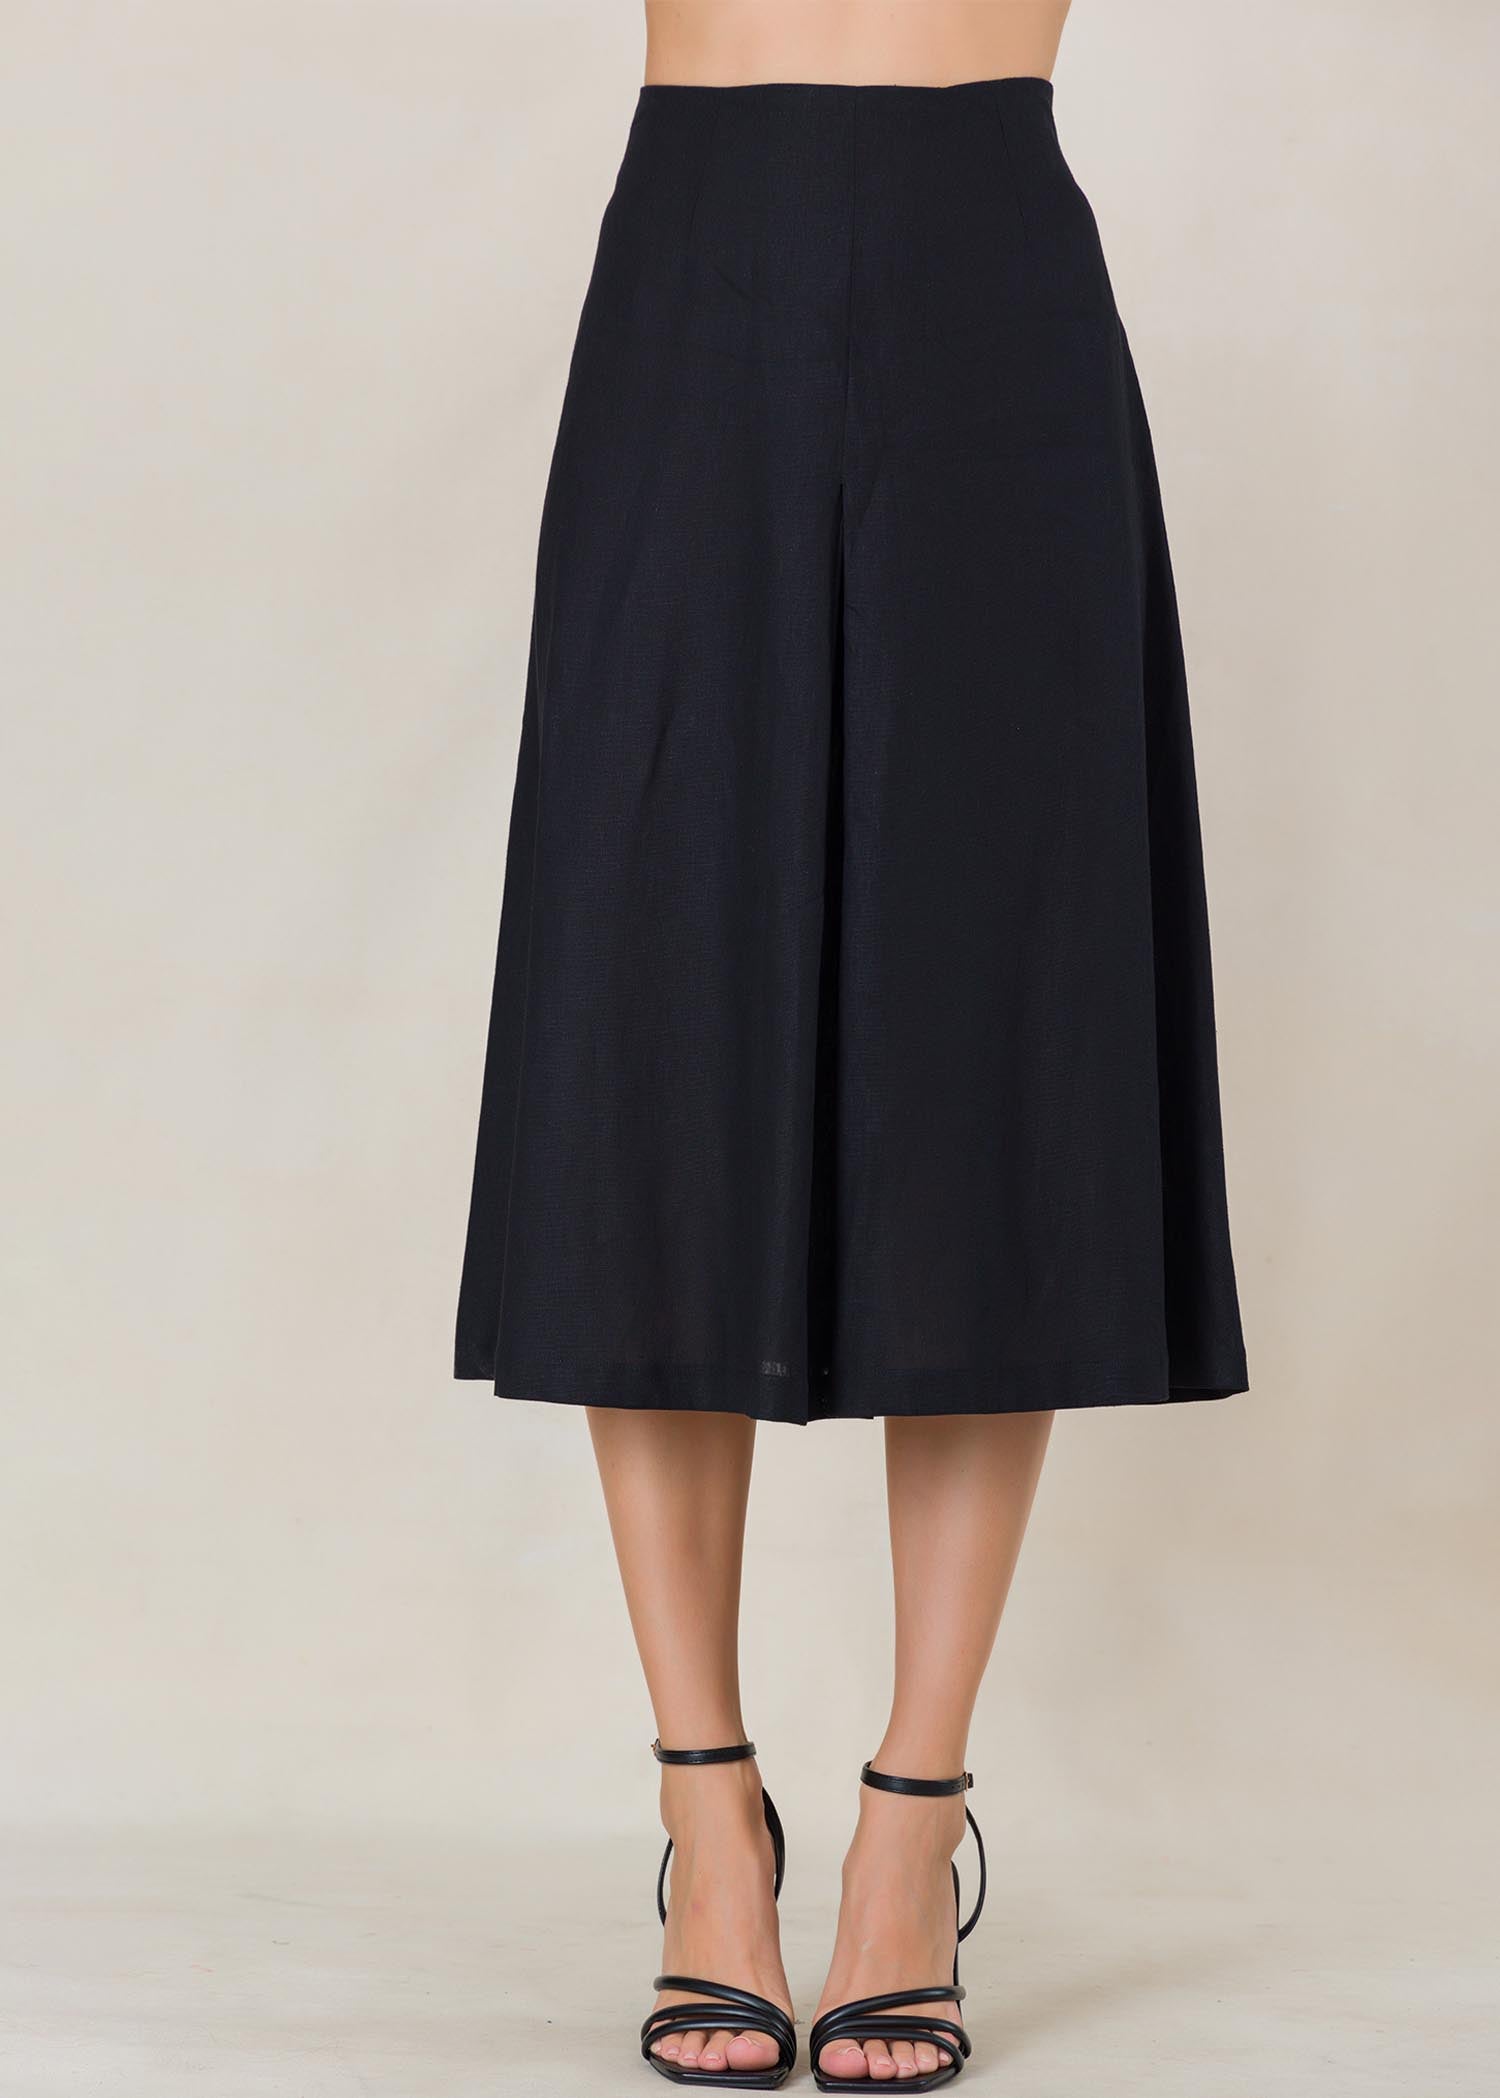 Linen skirt with front inverted pleat